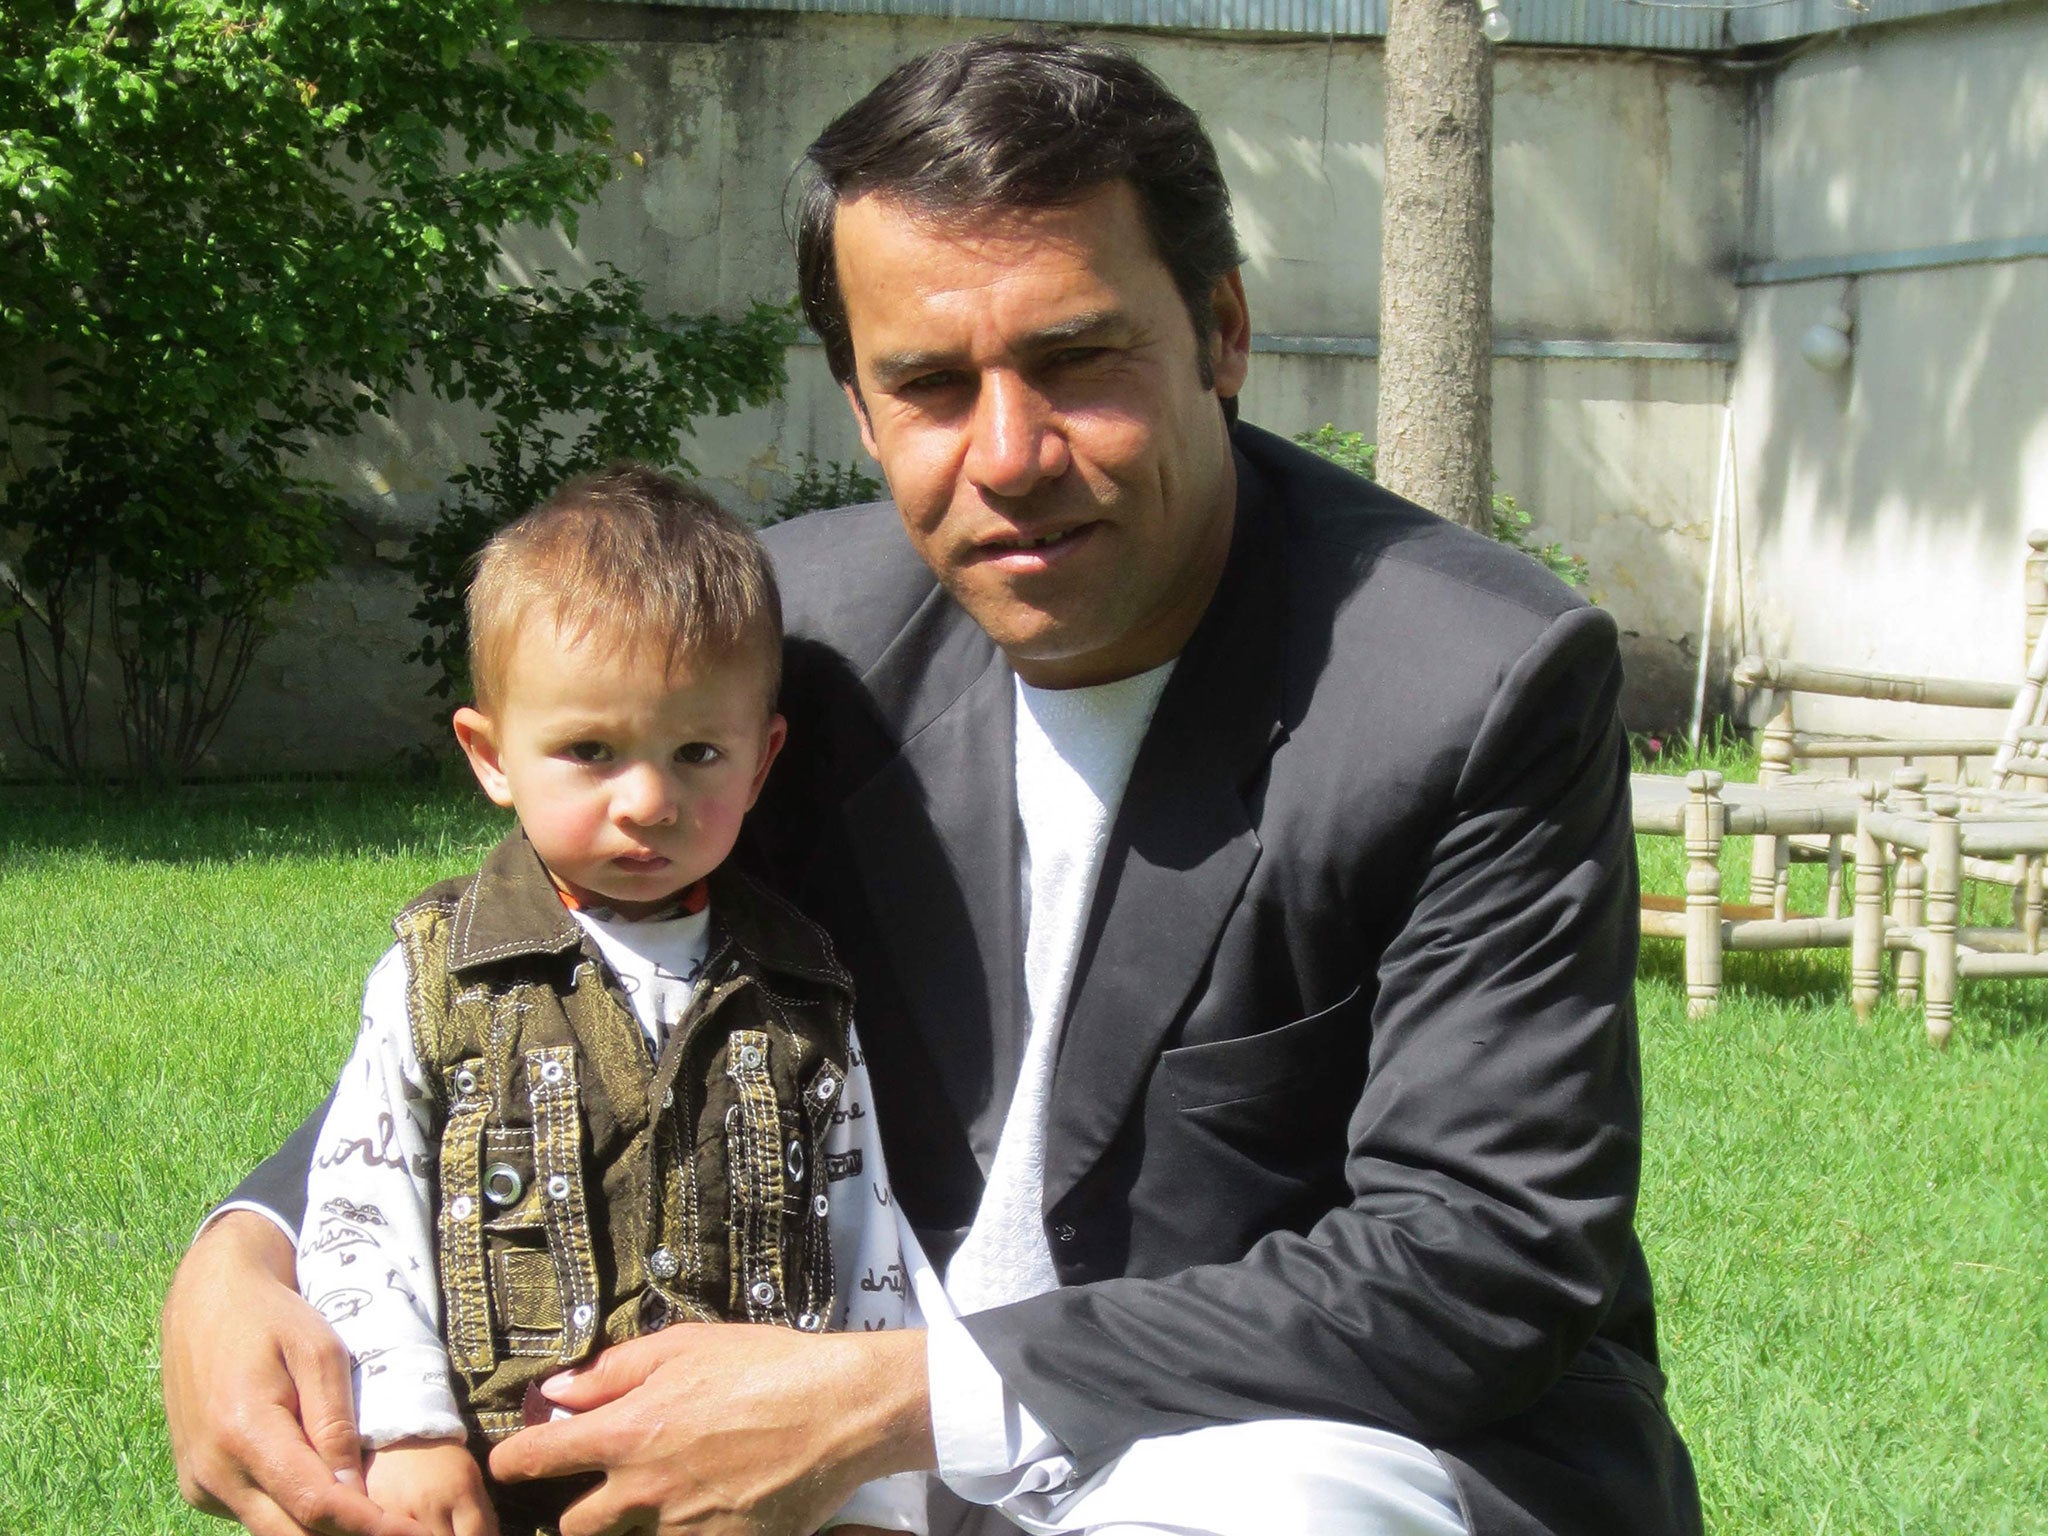 Shah Marai with one of his young sons in Kabul, 2013